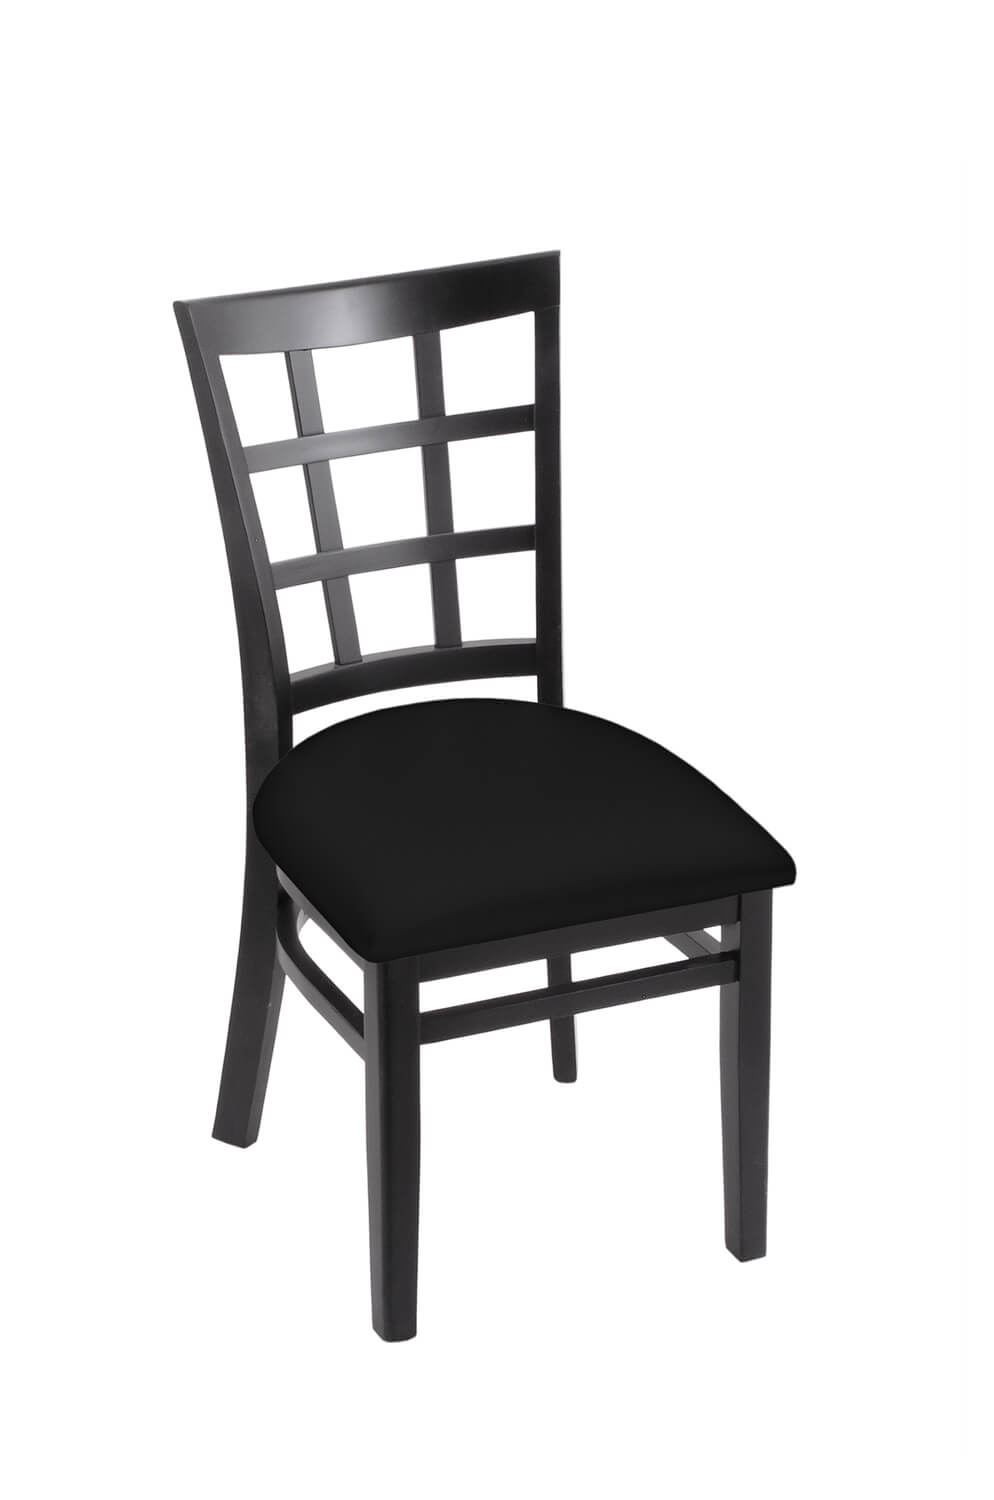 Buy Holland's 3130 Hampton Wood Dining Chair • Multiple Colors!